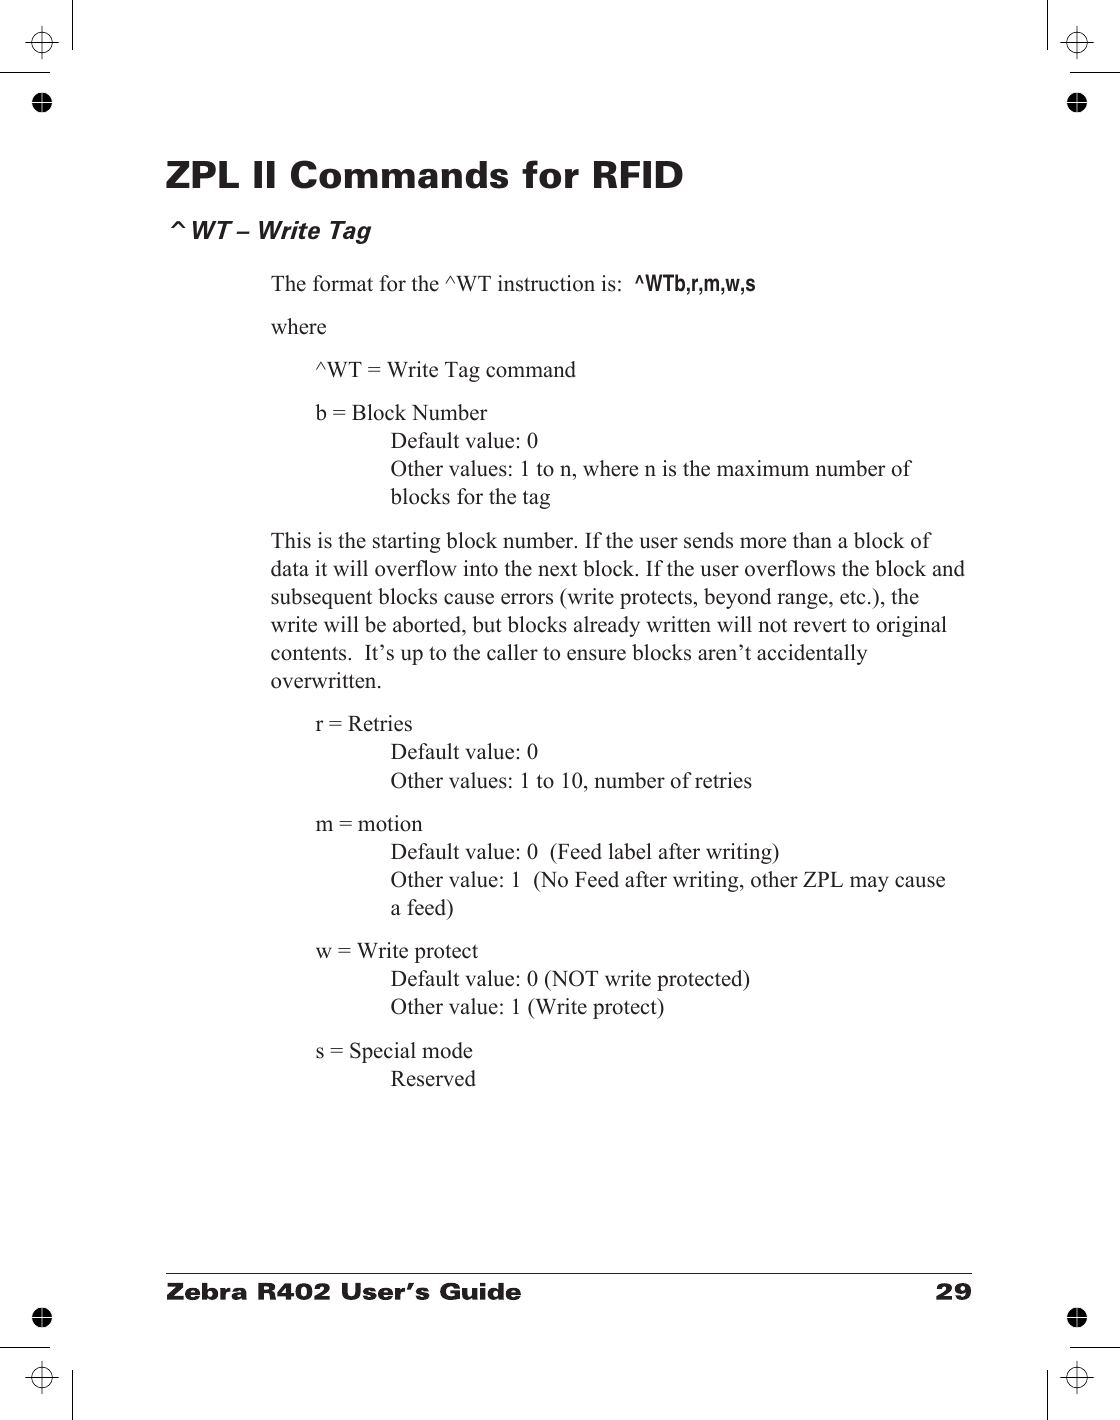 ZPL II Commands for RFID^WT – Write TagThe format for the ^WT instruction is:^WTb,r,m,w,swhere^WT = Write Tag commandb = Block NumberDefault value: 0Other values: 1 to n, where n is the maximum number ofblocks for the tagThis is the starting block number. If the user sends more than a block ofdata it will overflow into the next block. If the user overflows the block andsubsequent blocks cause errors (write protects, beyond range, etc.), thewrite will be aborted, but blocks already written will not revert to originalcontents.  It’s up to the caller to ensure blocks aren’t accidentallyoverwritten.r = RetriesDefault value: 0Other values: 1 to 10, number of retriesm = motionDefault value: 0  (Feed label after writing)Other value: 1  (No Feed after writing, other ZPL may causea feed)w = Write protectDefault value: 0 (NOT write protected)Other value: 1 (Write protect)s = Special modeReserved